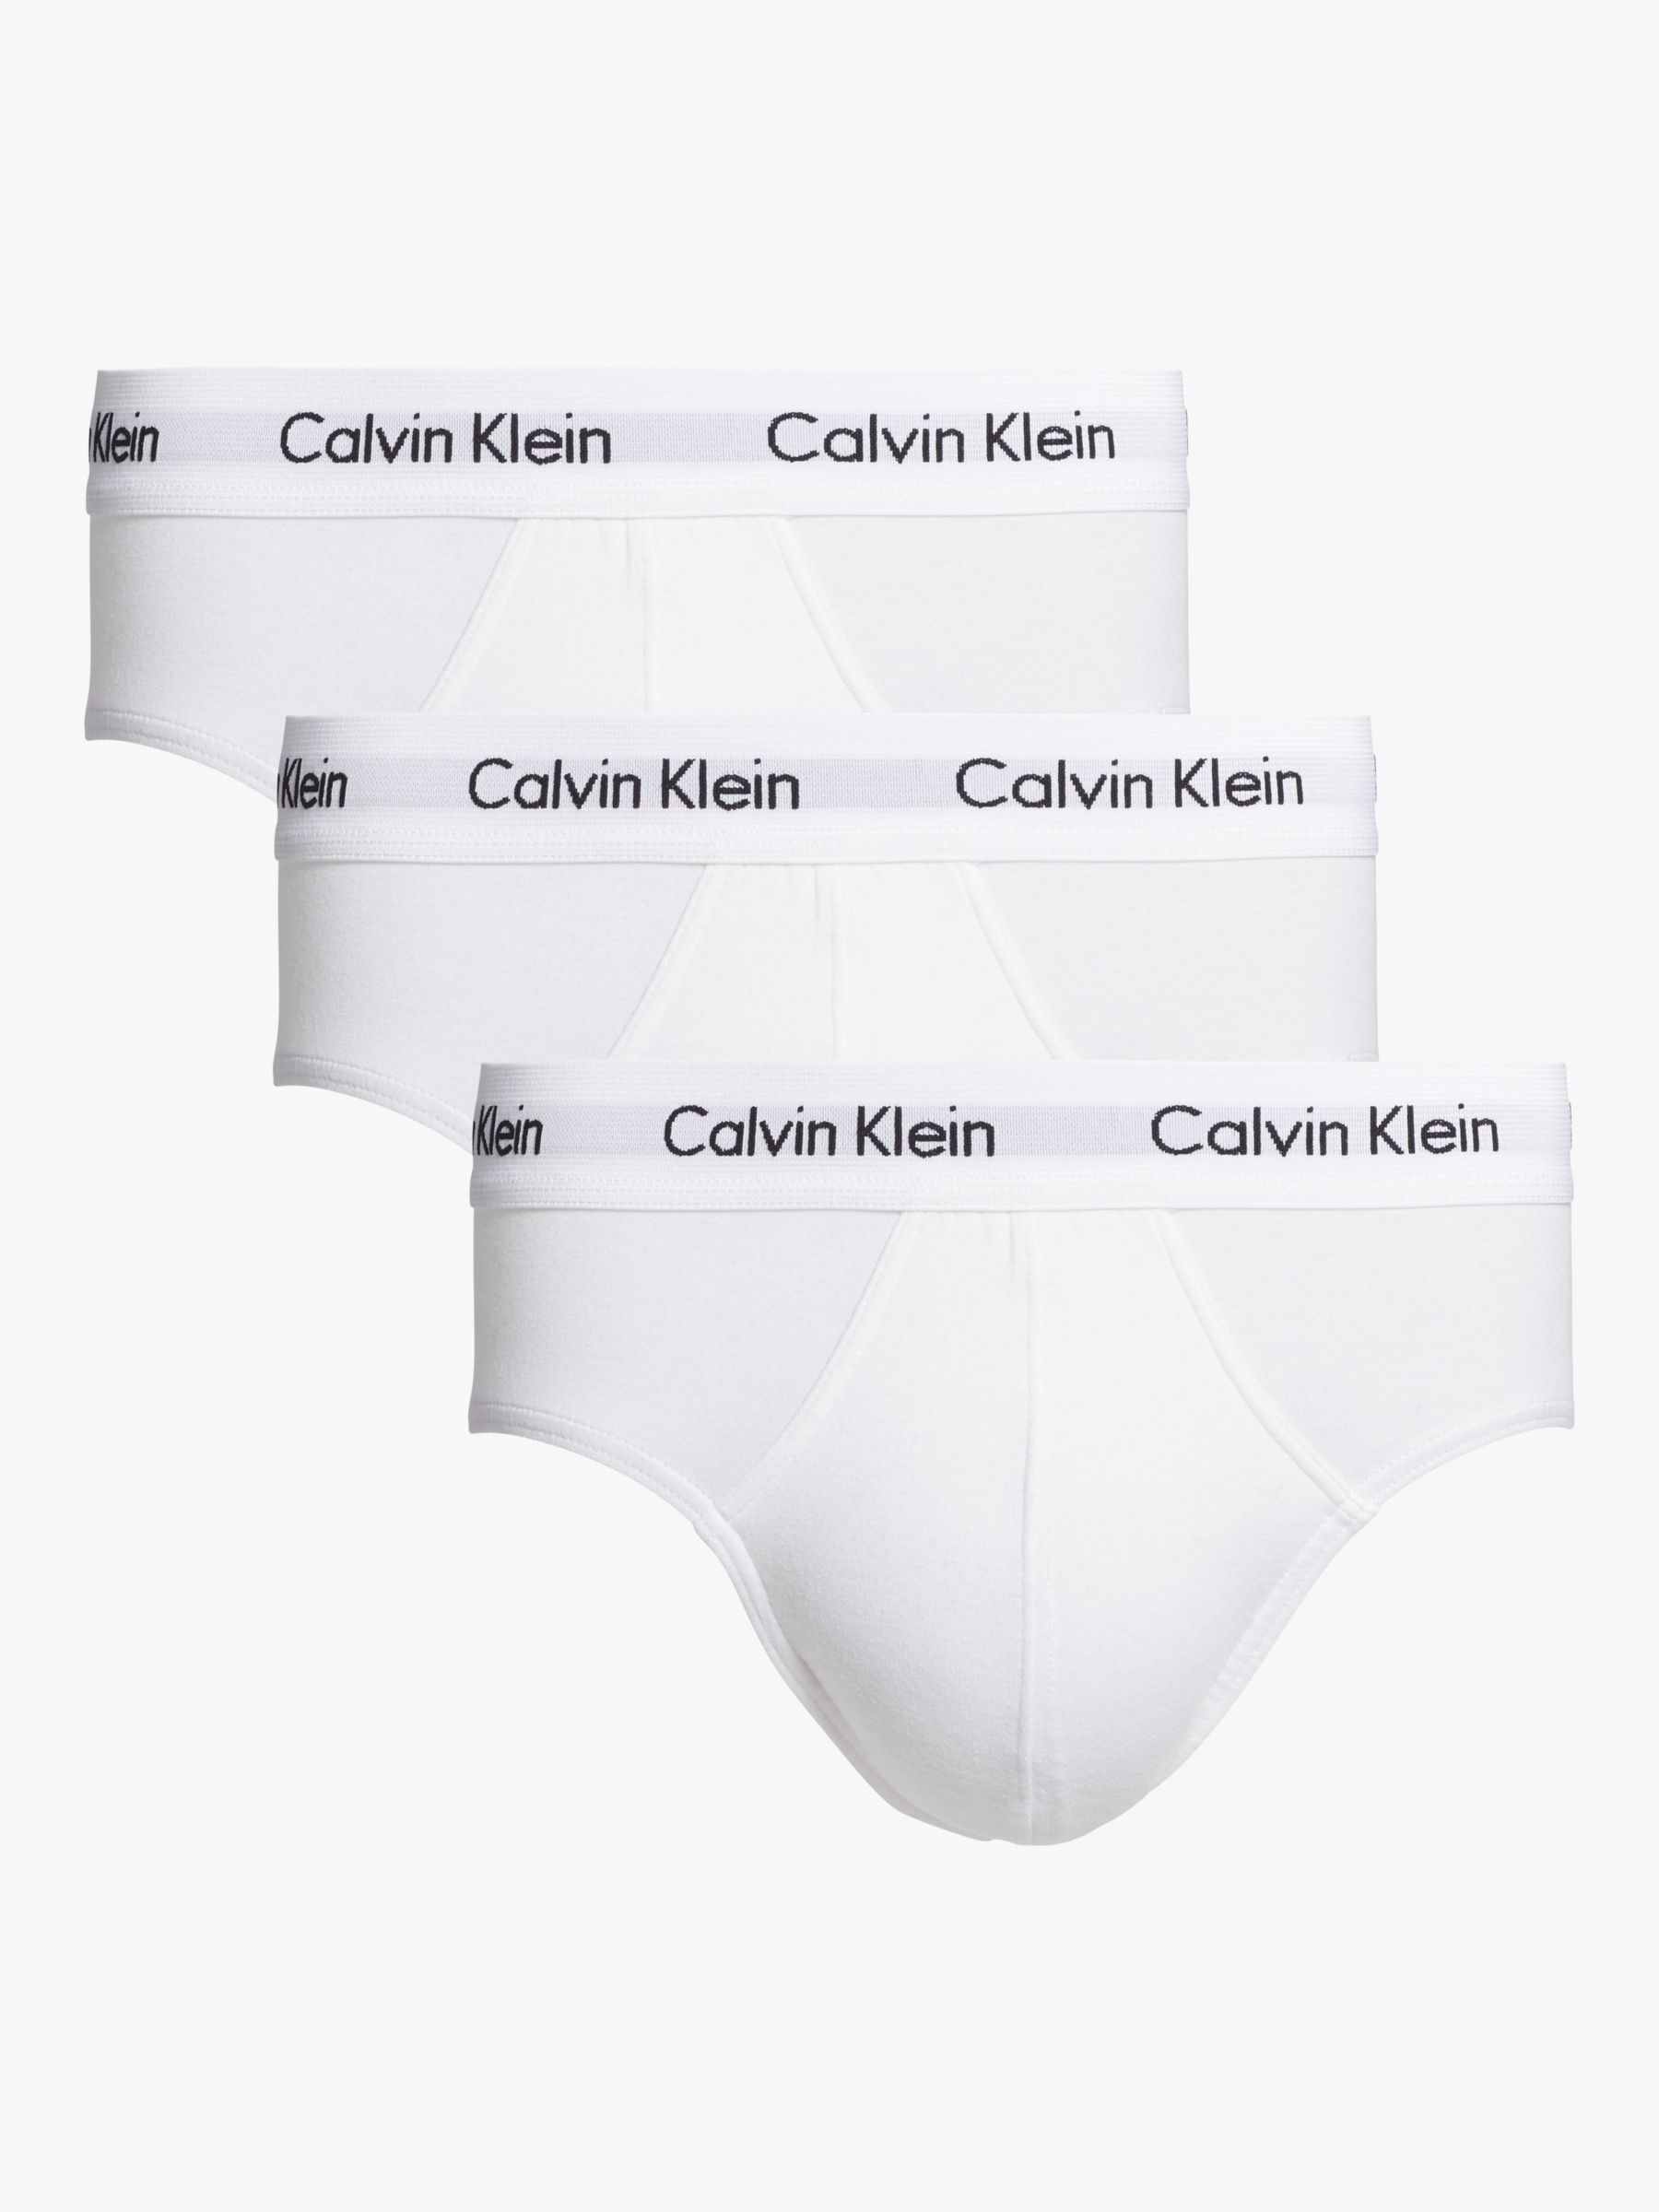 Pack of 2 pairs of Pur Coton midi knickers in white